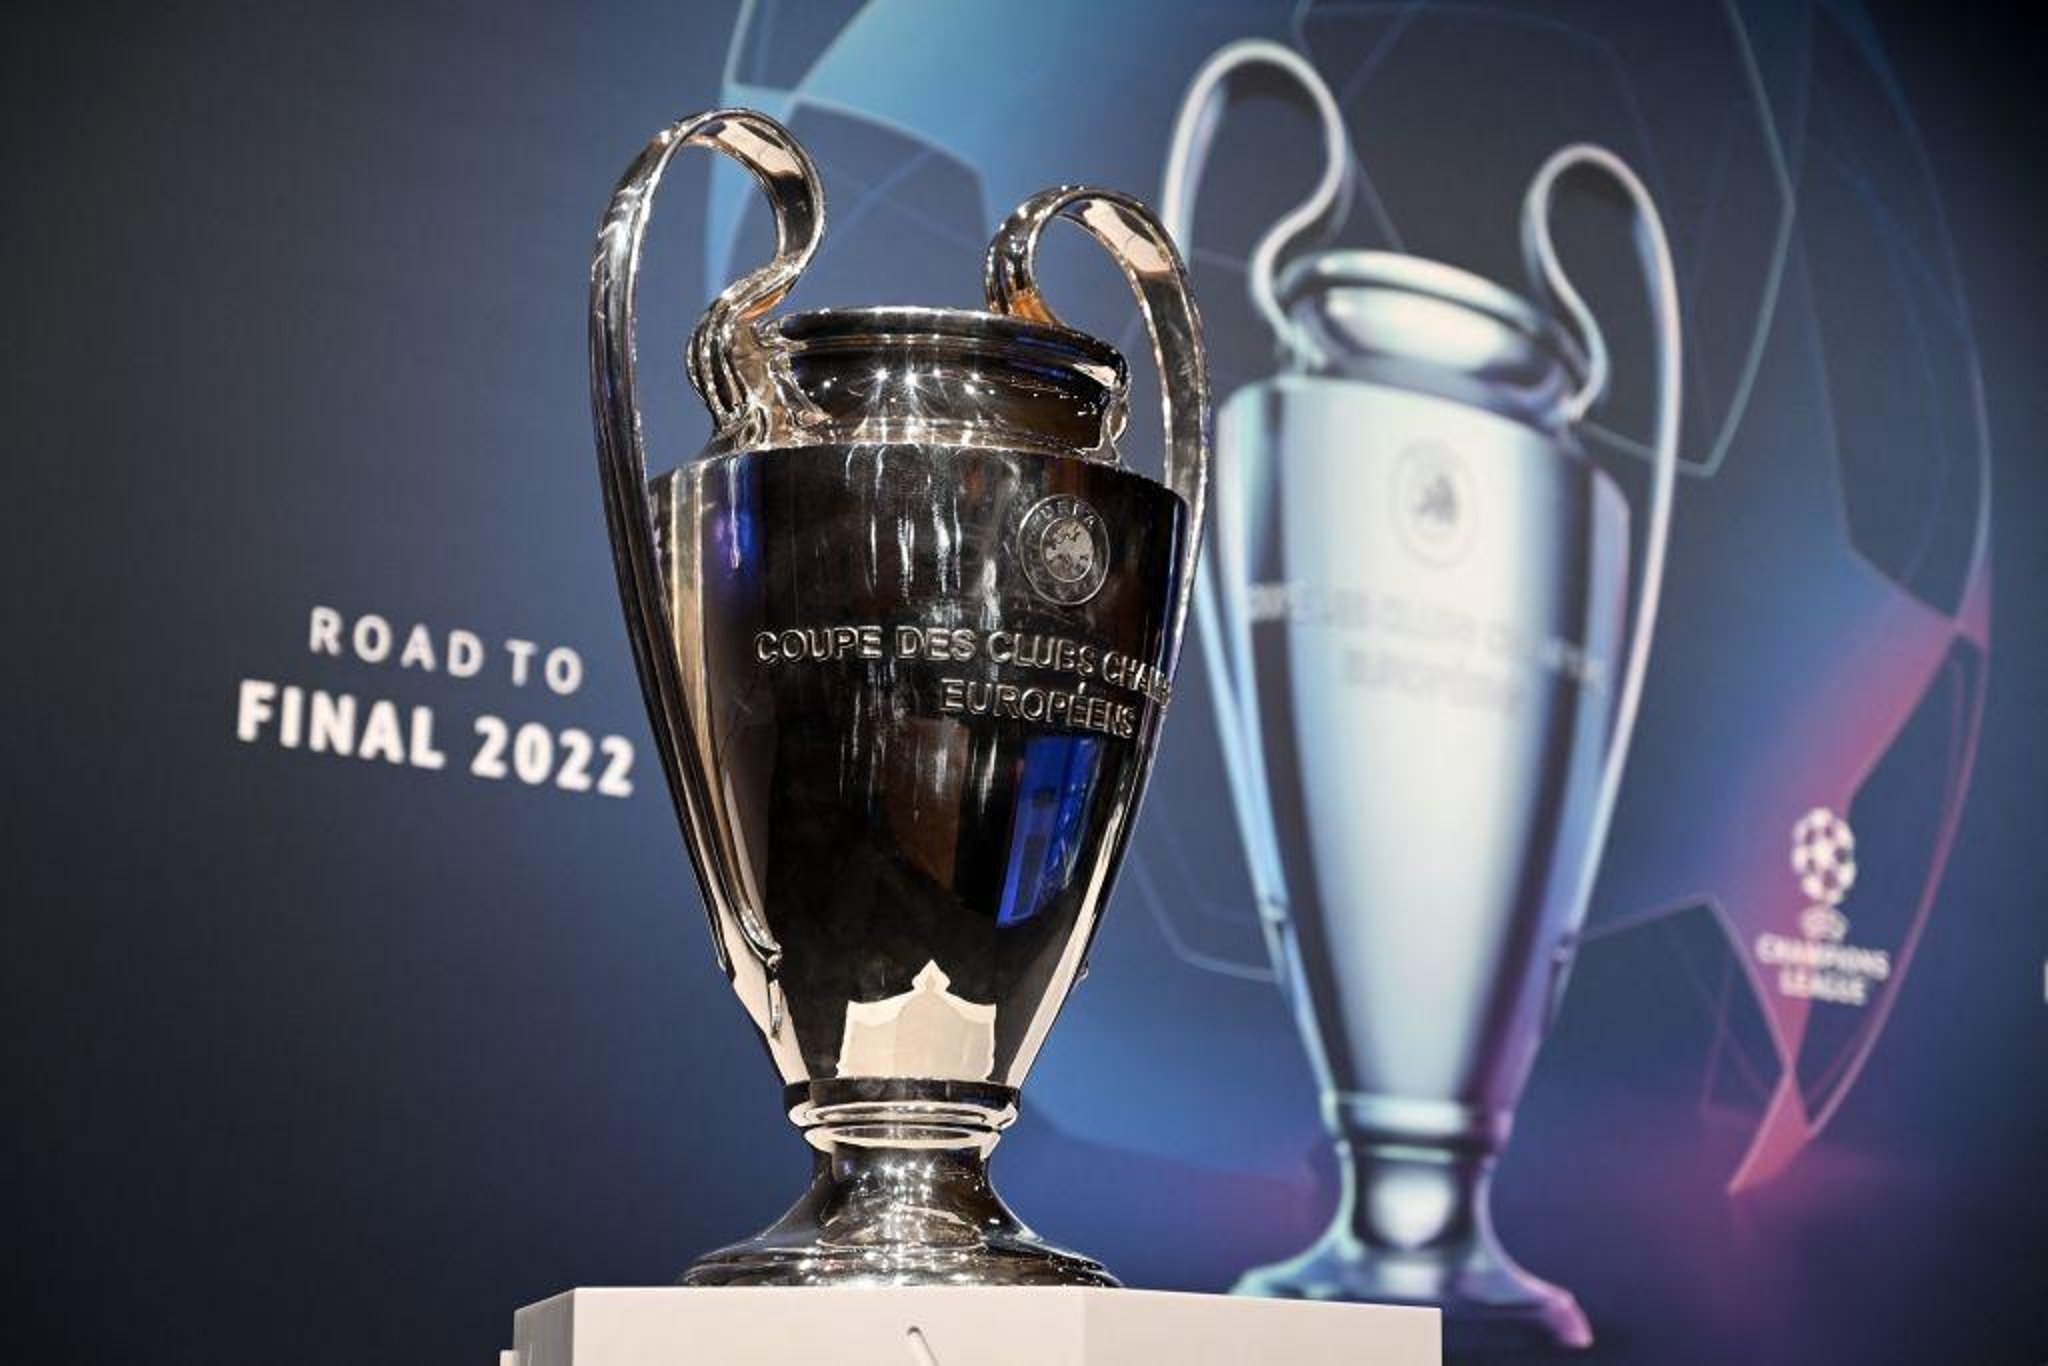 Ucl 2022